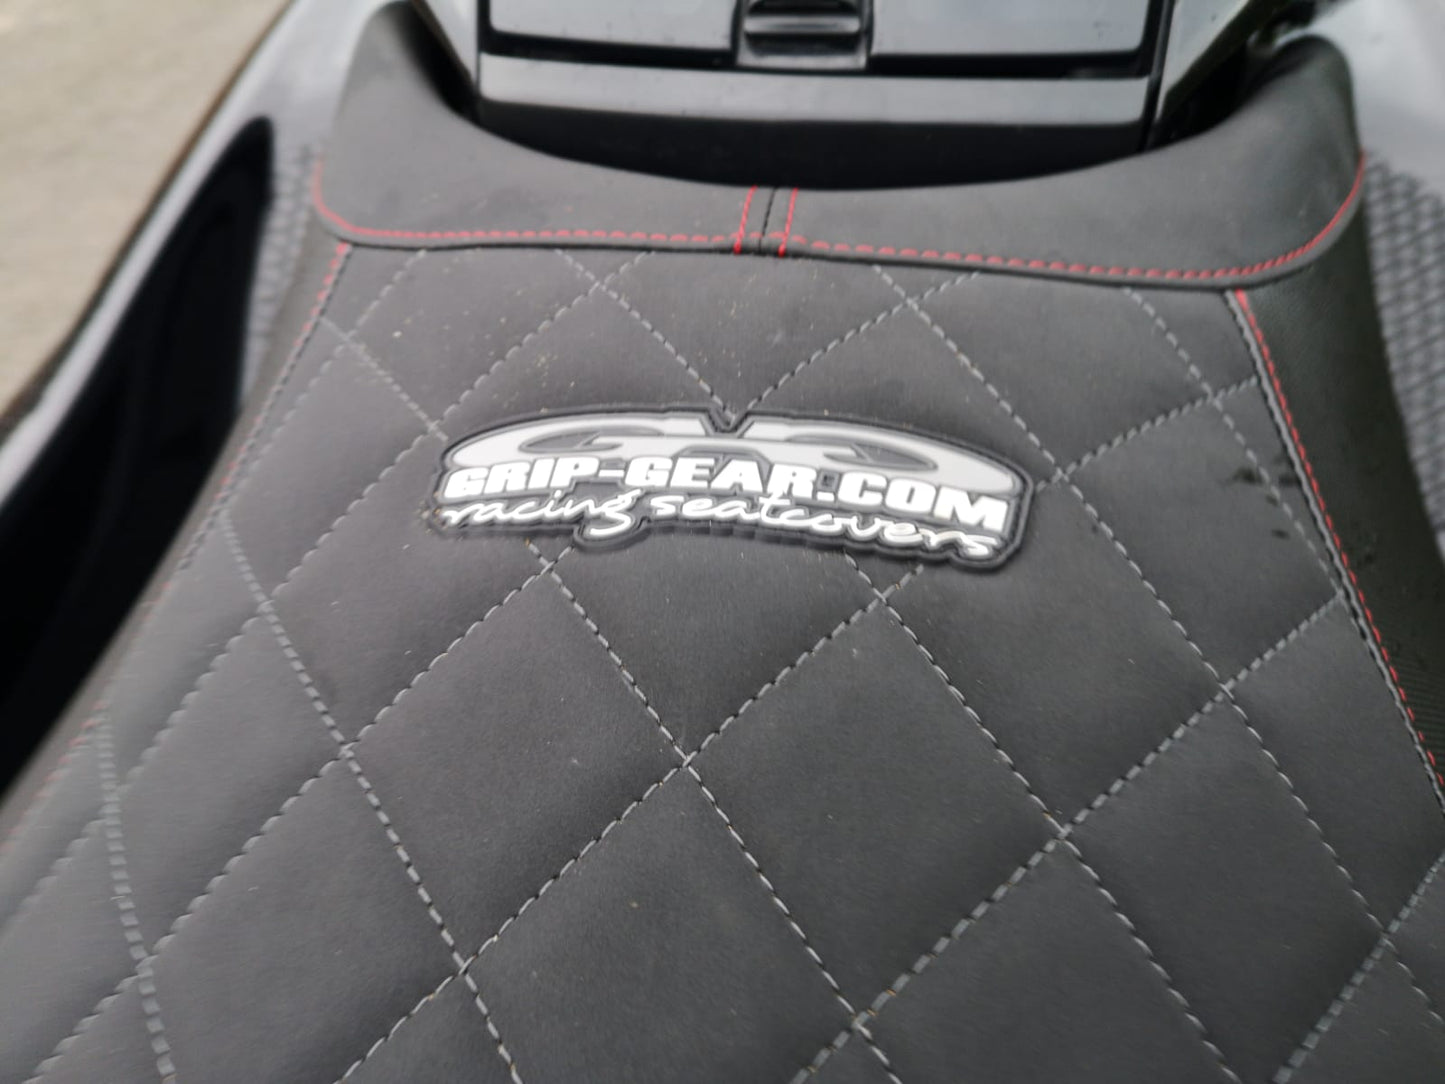 Grip Gear Seadoo Yamaha Replacement Seat Cover